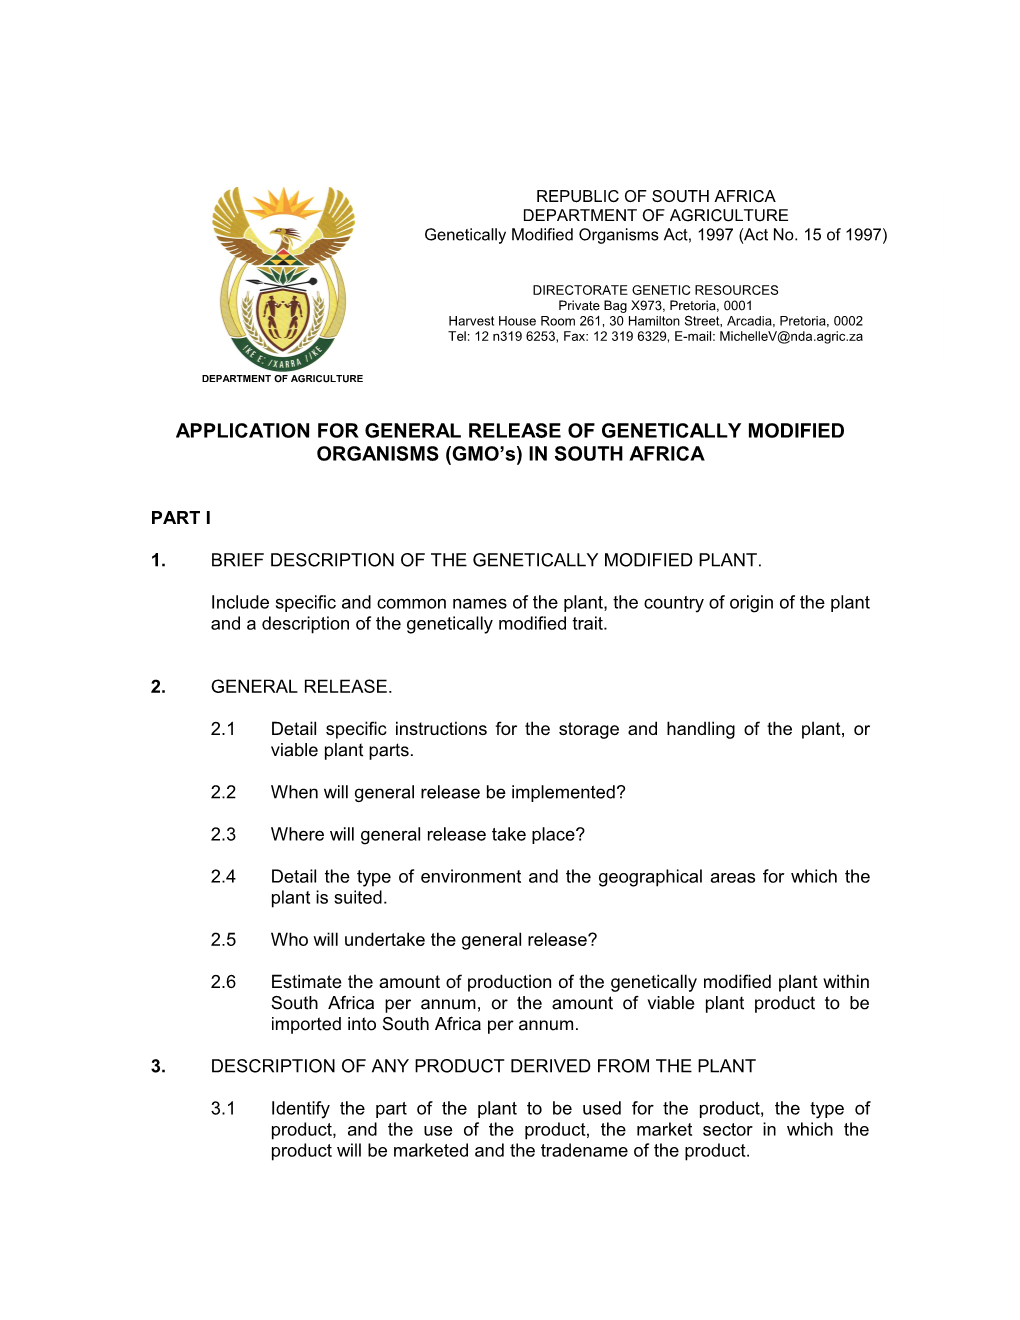 APPLICATION for GENERAL RELEASE of GENETICALLY MODIFIED ORGANISMS (GMO S) in SOUTH AFRICA